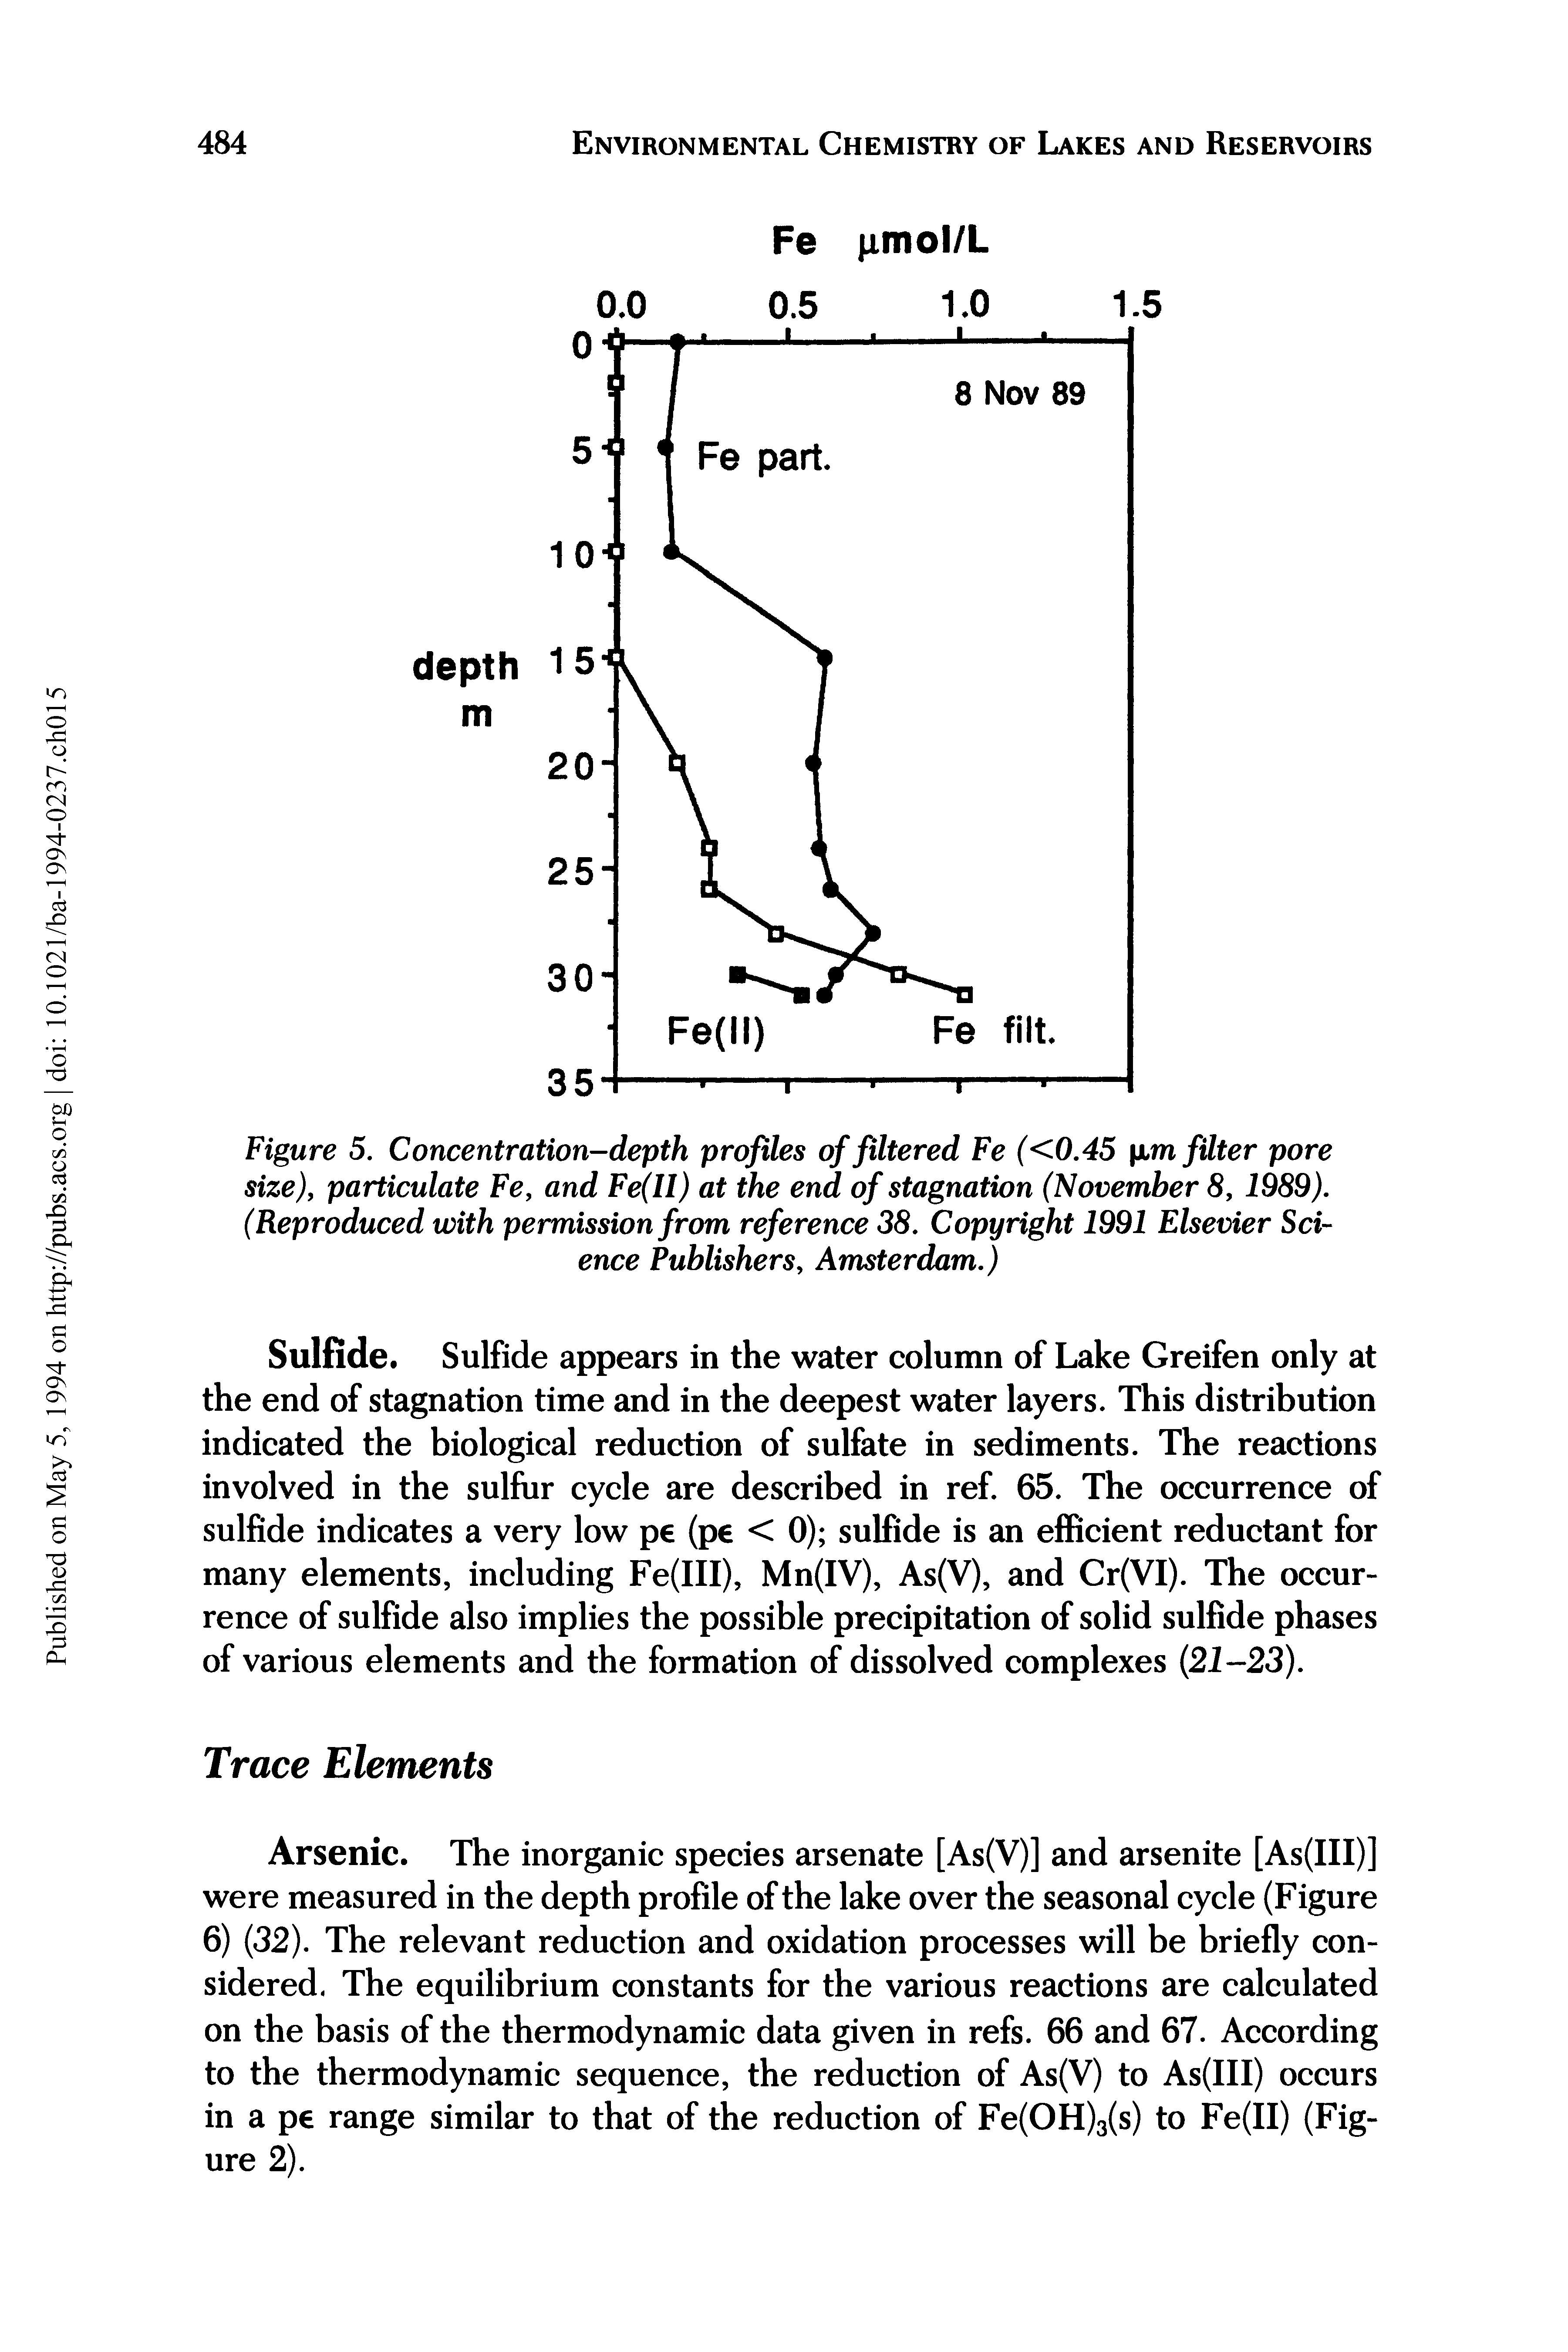 Figure 5. Concentration-depth profiles of filtered Fe (<0.45 pm filter pore size), particulate Fe, and Fe(H) at the end of stagnation (November 8,1989). (Reproduced with permission from reference 38. Copyright 1991 Elsevier Science Publishers, Amsterdam.)...